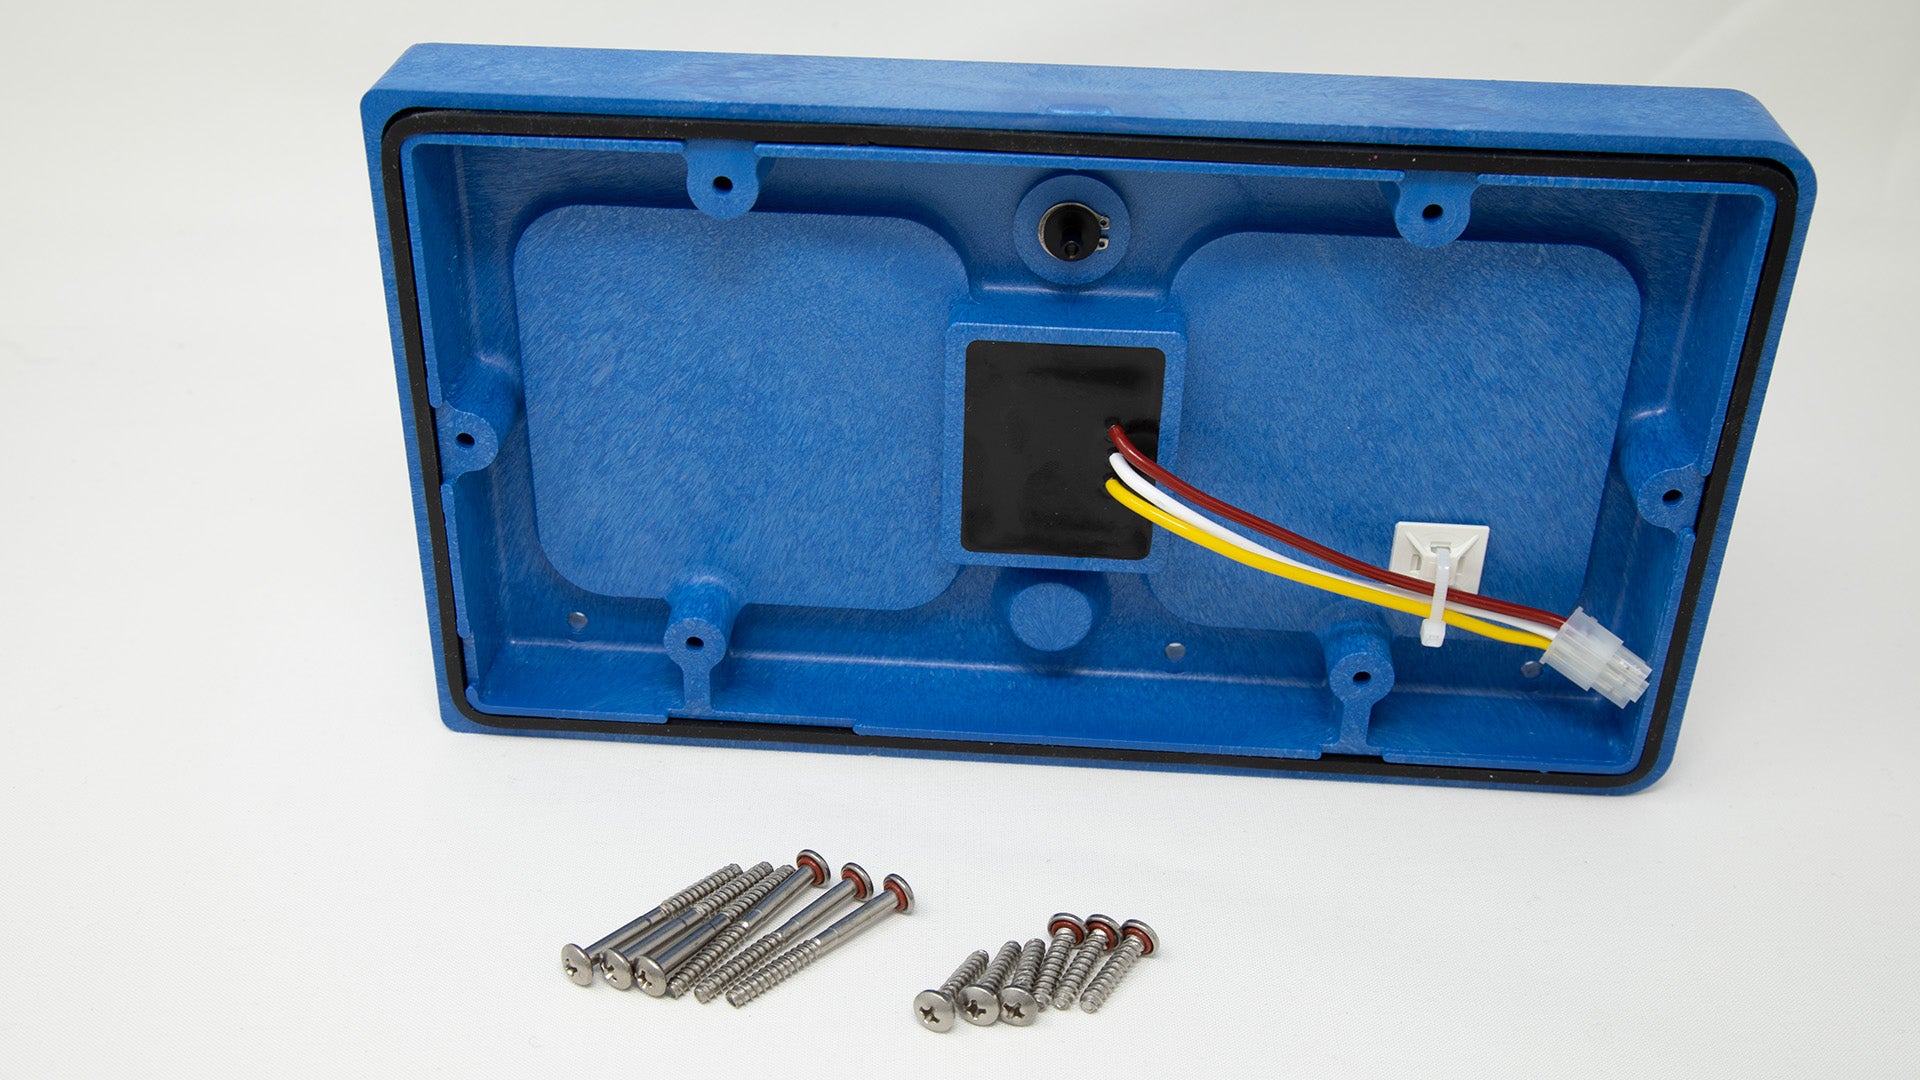 Plastic cover with seal, connecting wires and screws.